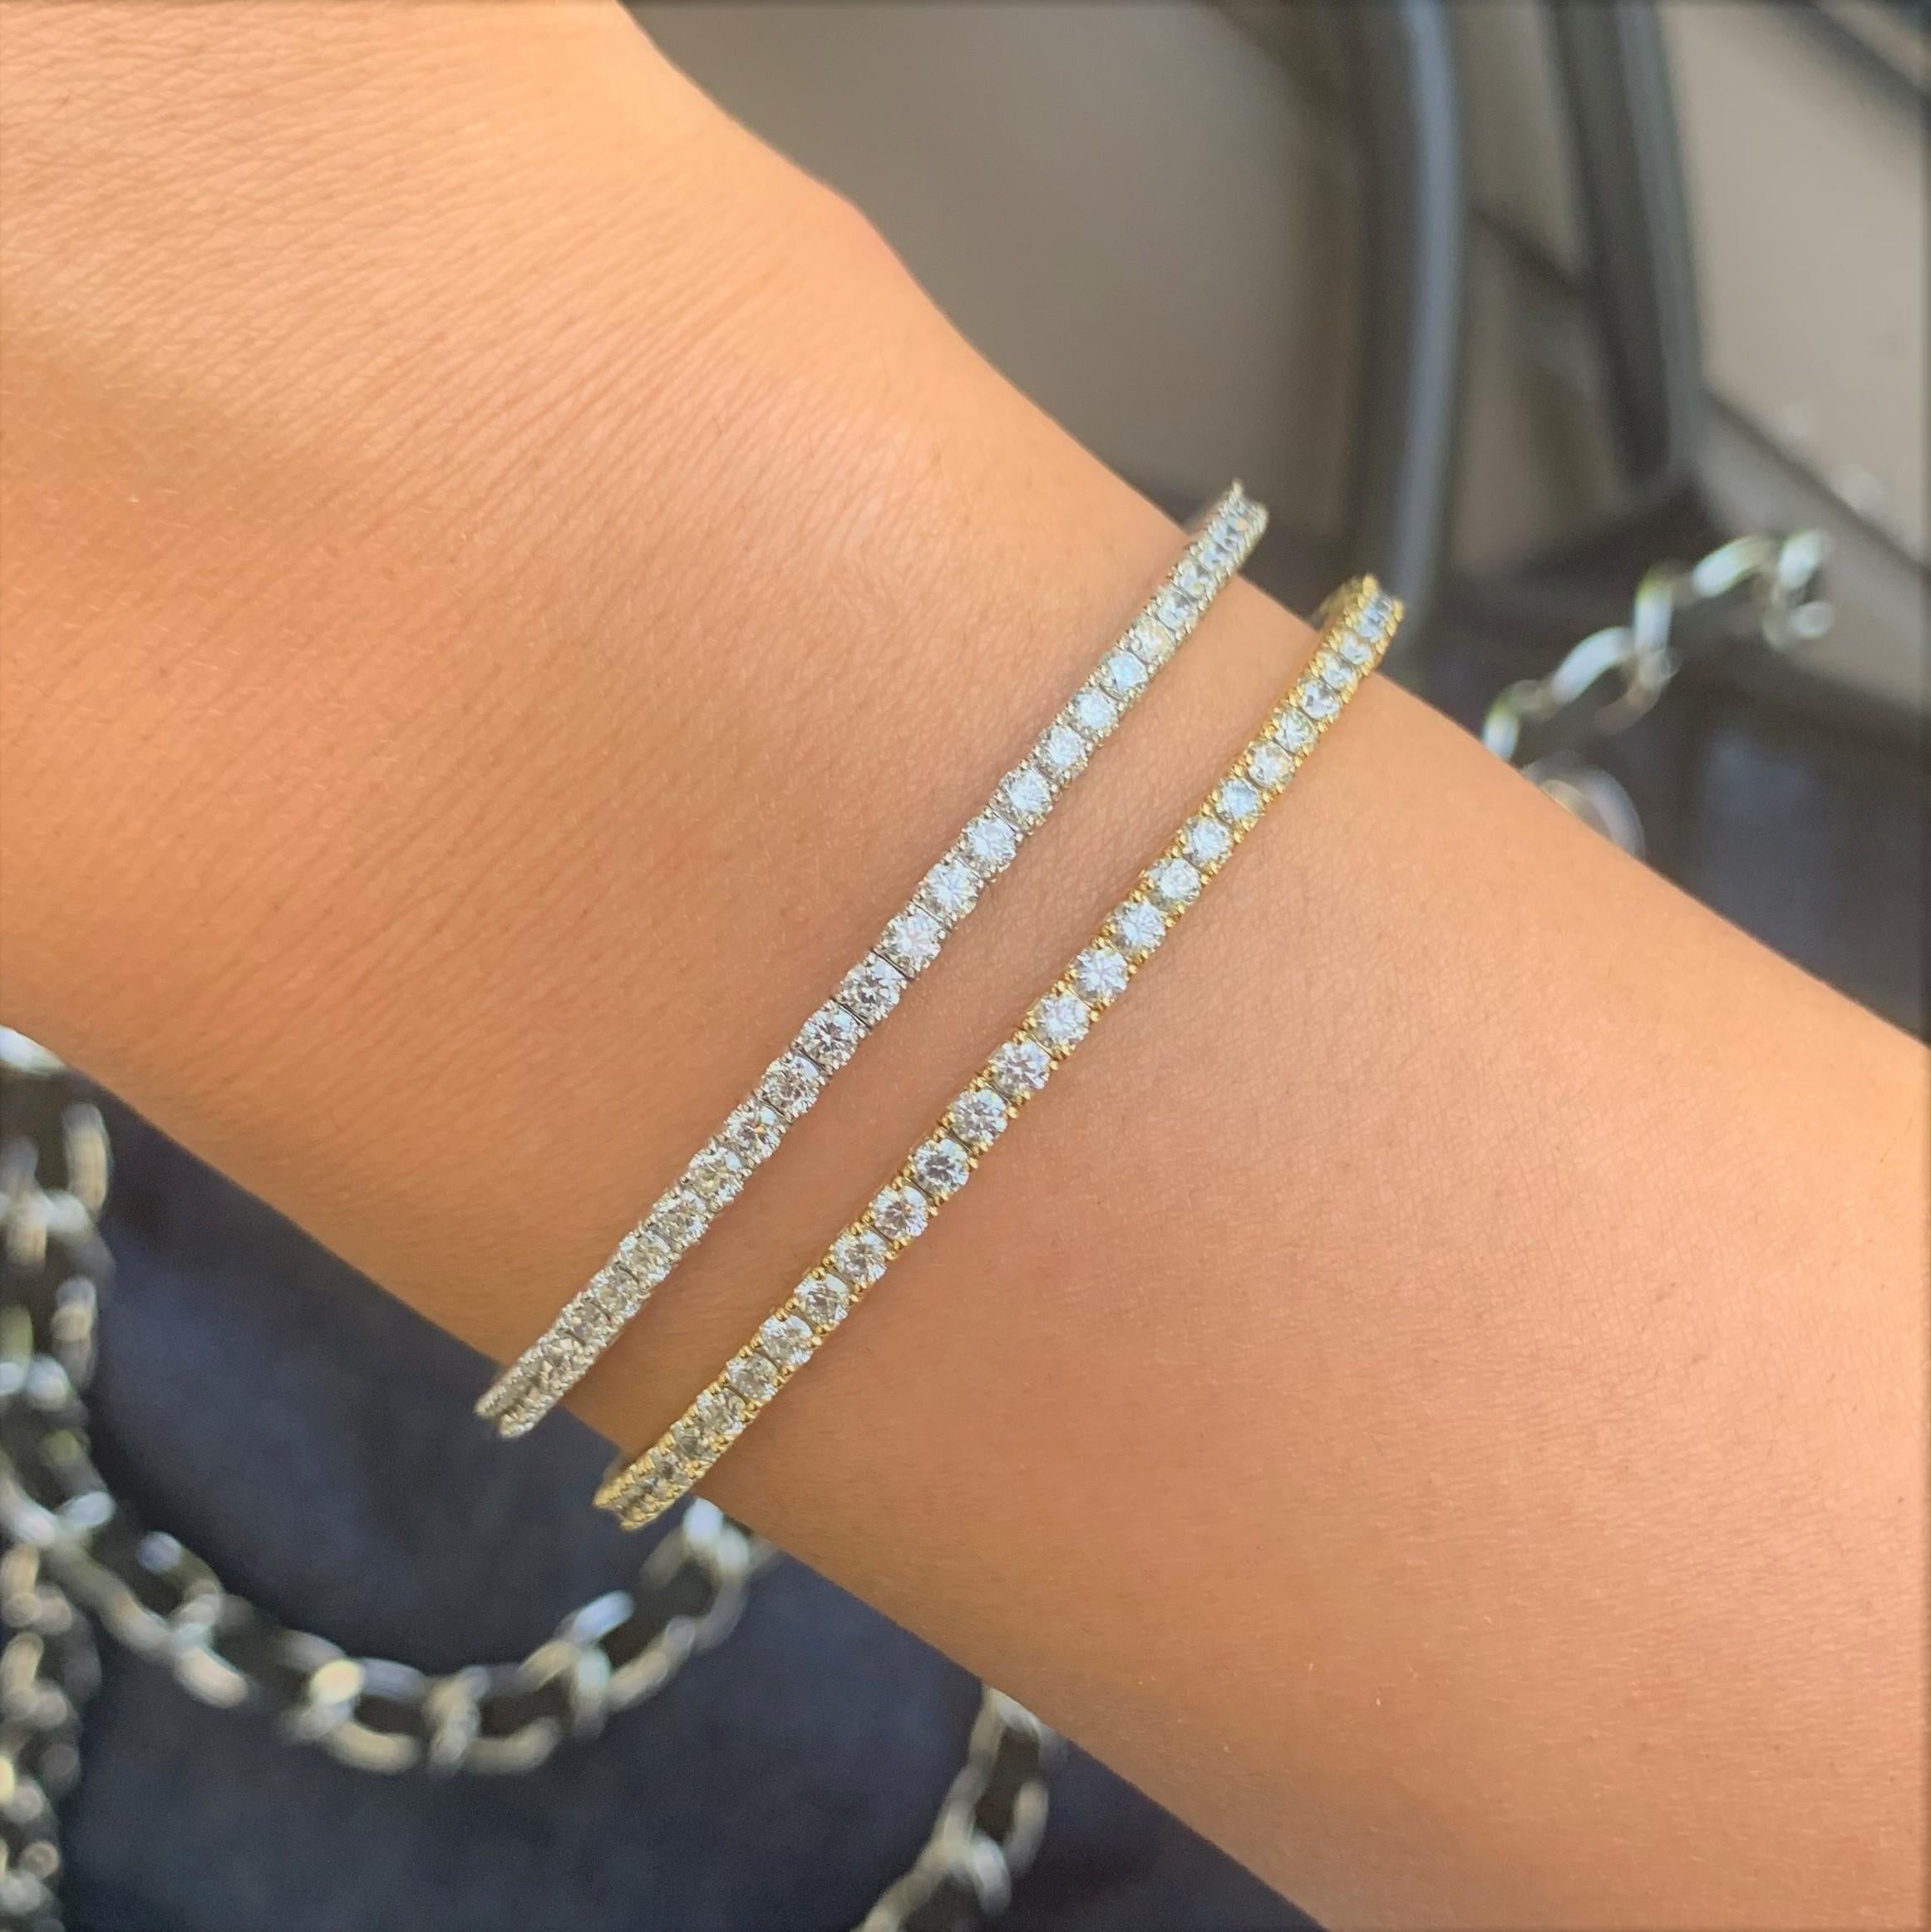 Quality Flexible Bangle: Made from real 14k gold and 60 glittering white approximately 3.02 ct. Certified diamonds, featuring a single row of white diamonds flexible diameter for comfort with a color and clarity of GH-SI
 Surprise Your Loved One